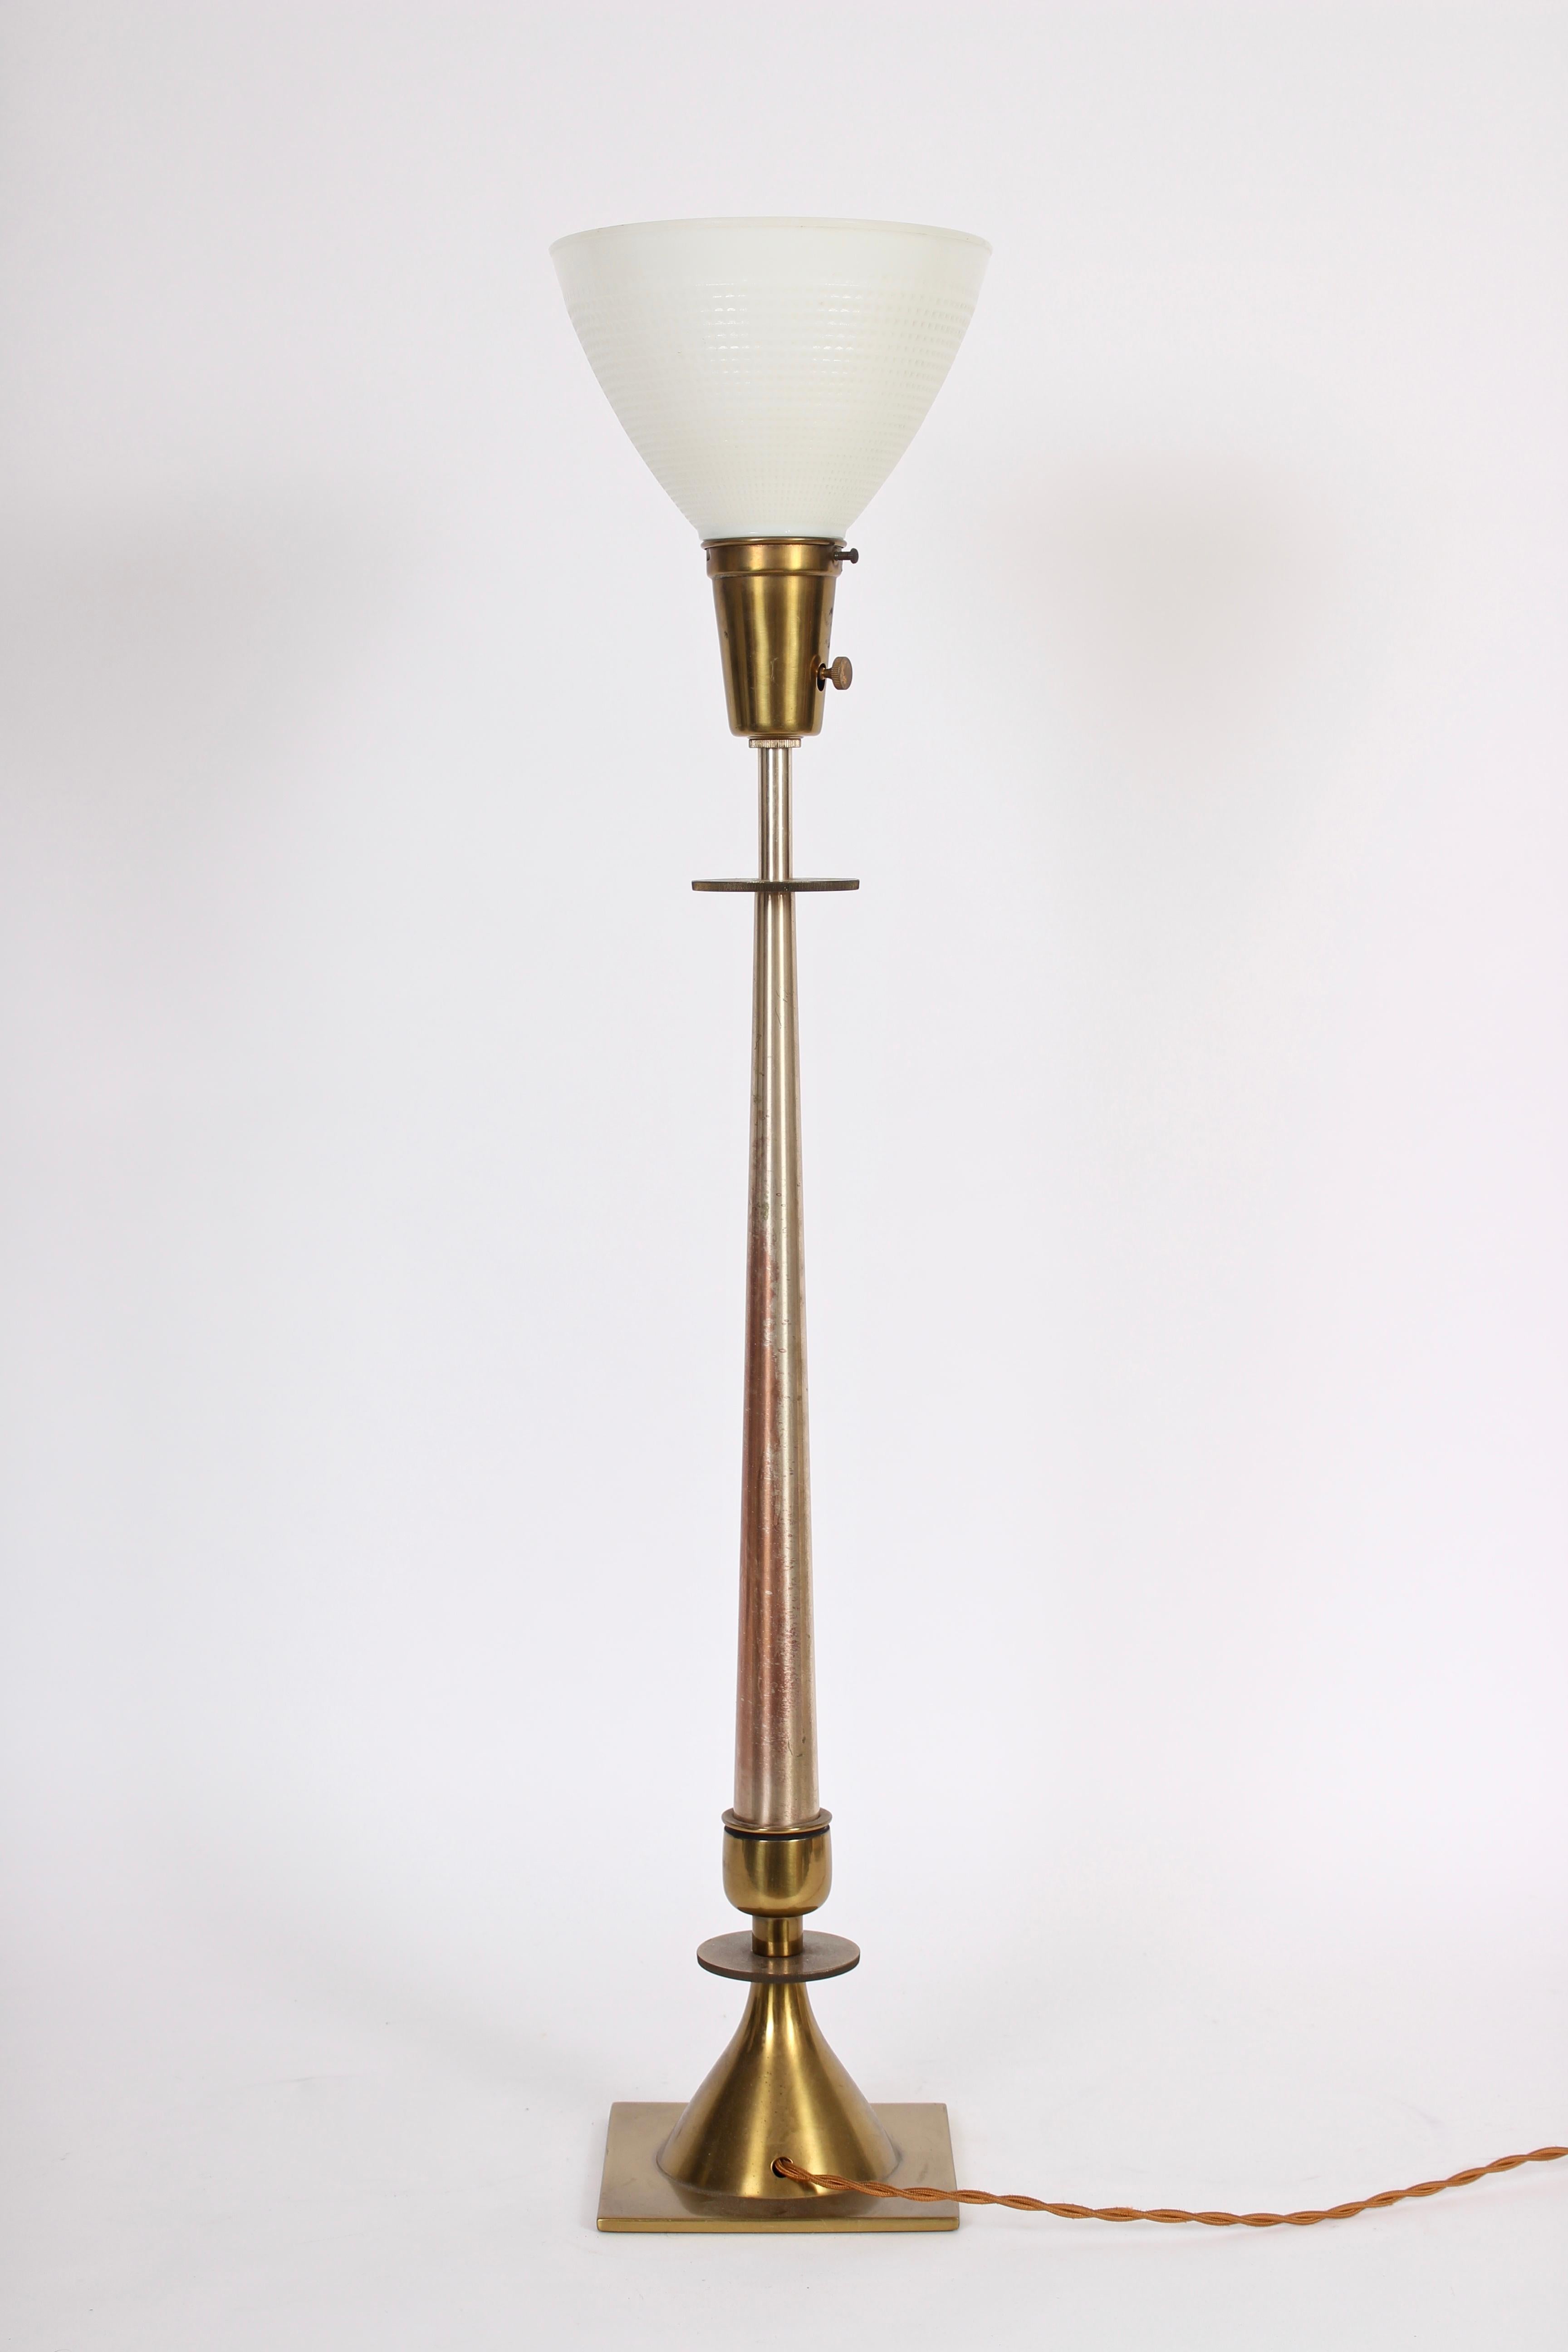 Brushed Tall Tommi Parzinger Style Nickel & Brass Stiffel Lamp with Milk Glass Shade For Sale